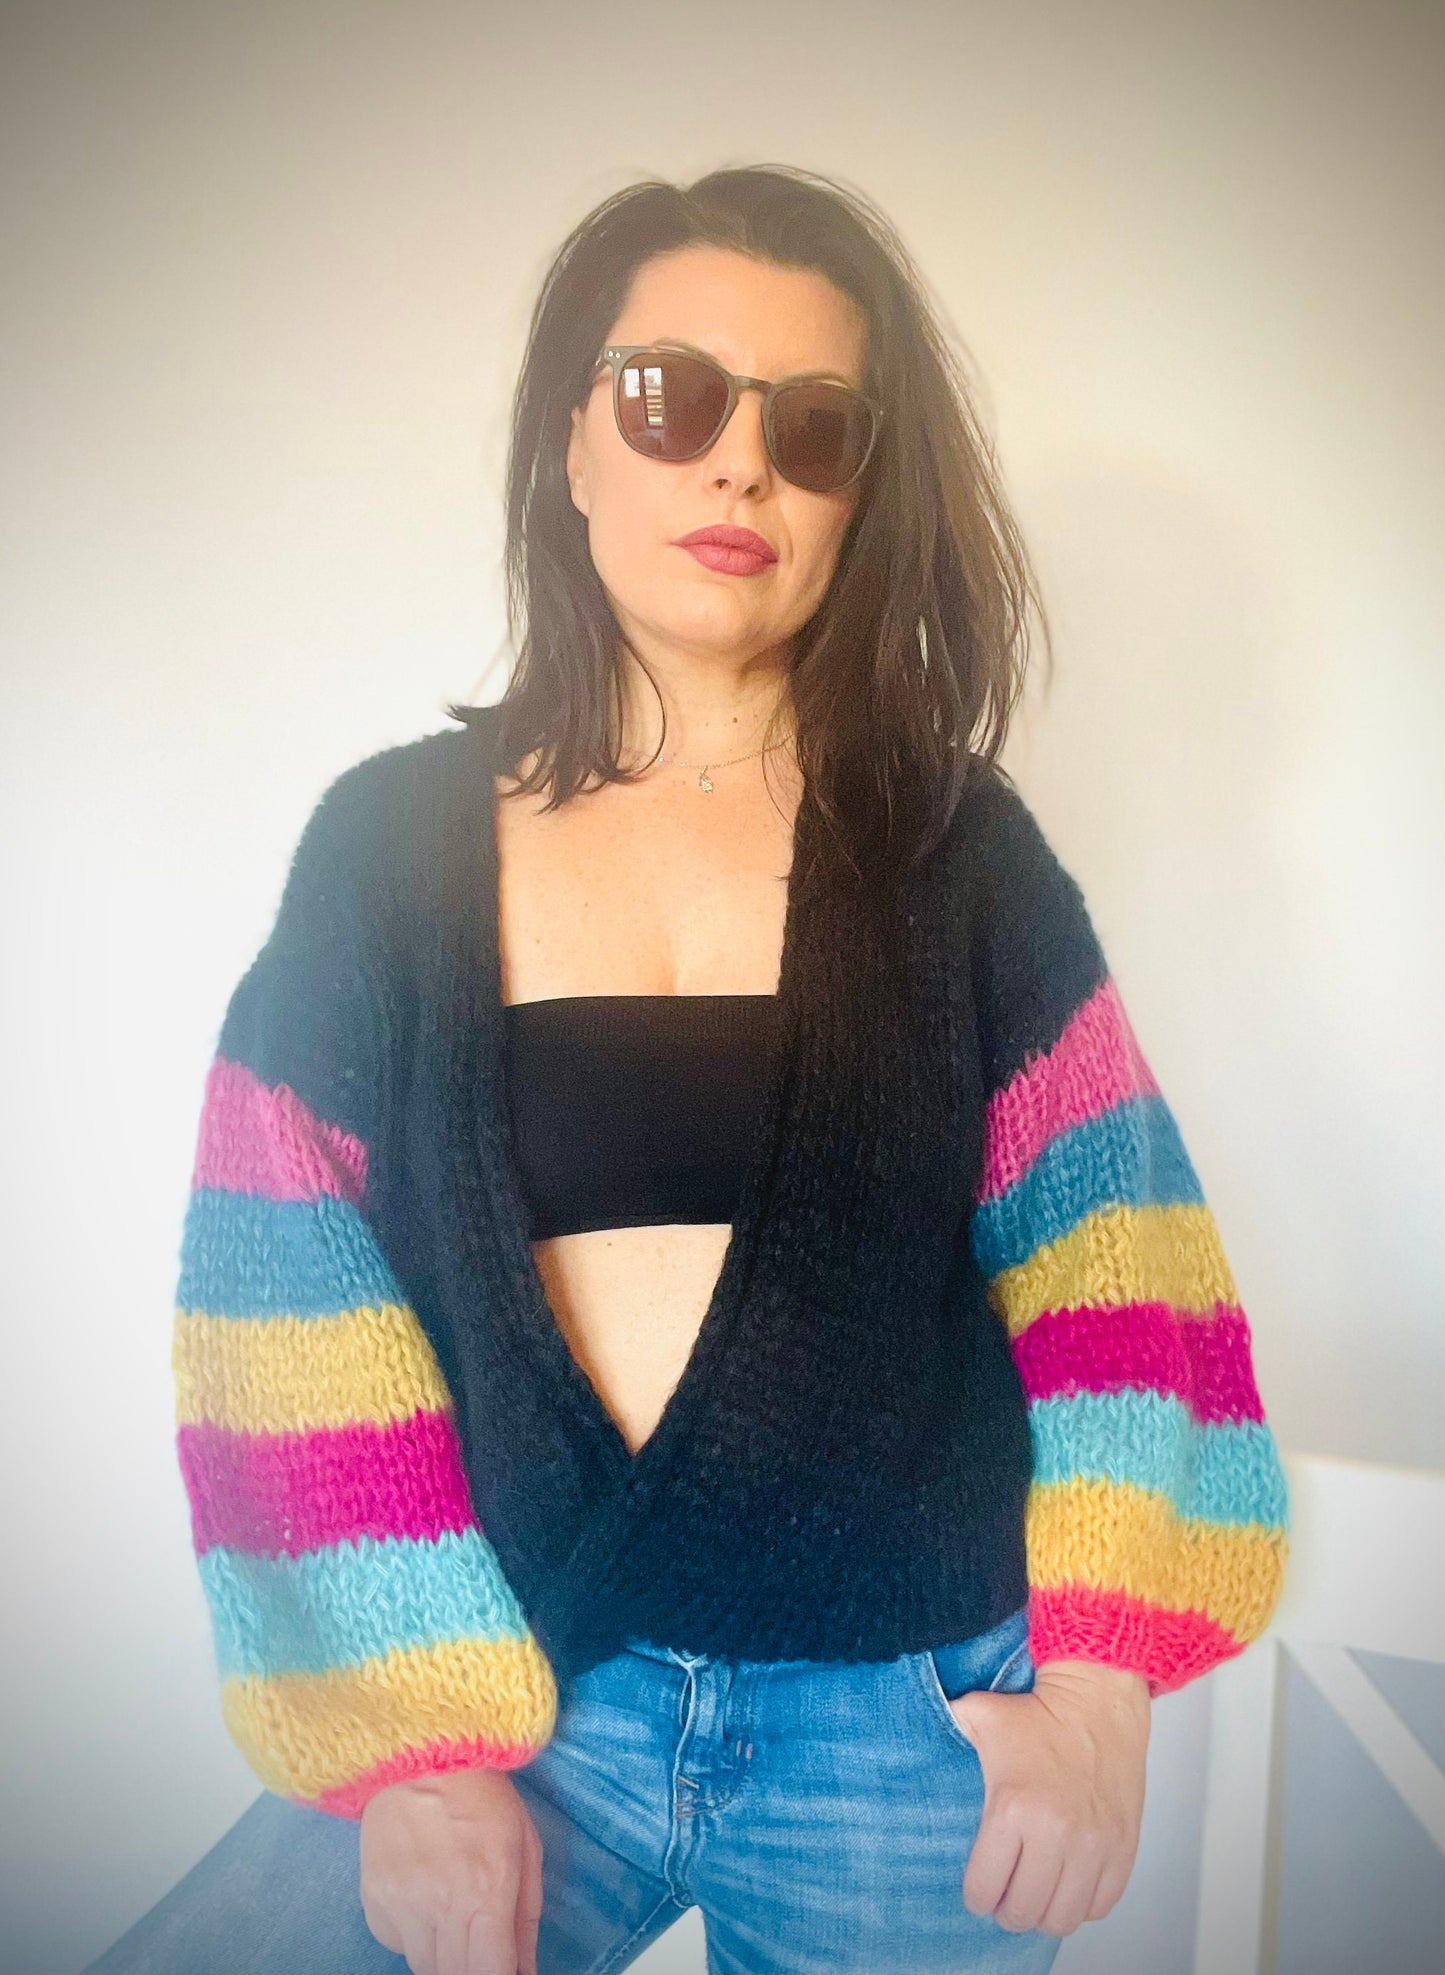 LIRA Black Cashmere Mohair Cardigan with Multicolor Striped Balloon Sleeves, Chunky Knit Jumper, Soft Black Cardigan, Knit Mohair Cardigan